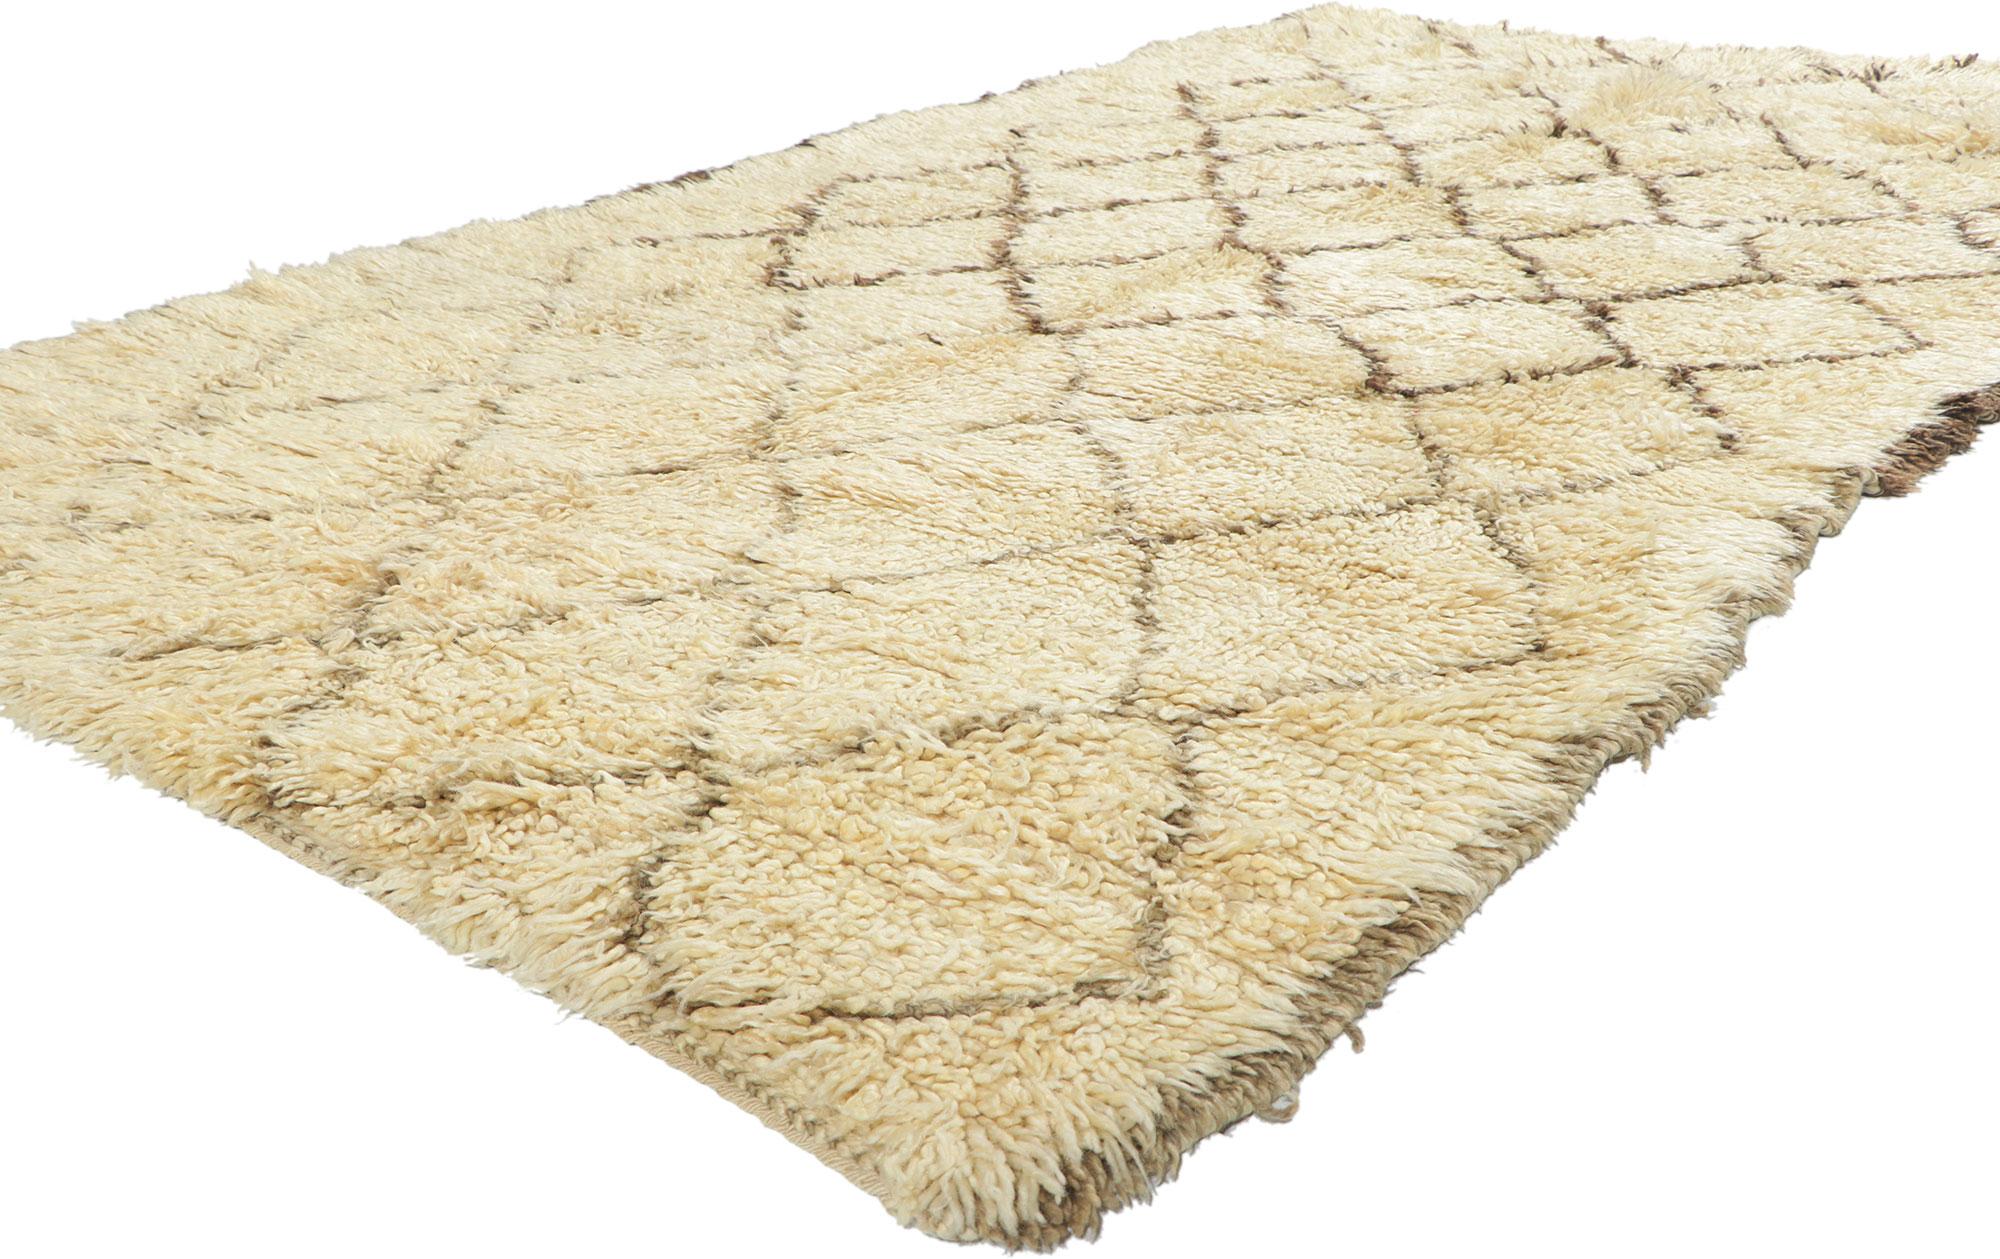 78383 Vintage Moroccan Beni Ourain rug, 05'03 x 09'08. With its simplicity, plush pile, incredible detail and texture, this hand knotted wool vintage Beni Ourain Moroccan rug is a captivating vision of woven beauty. The eye-catching diamond trellis